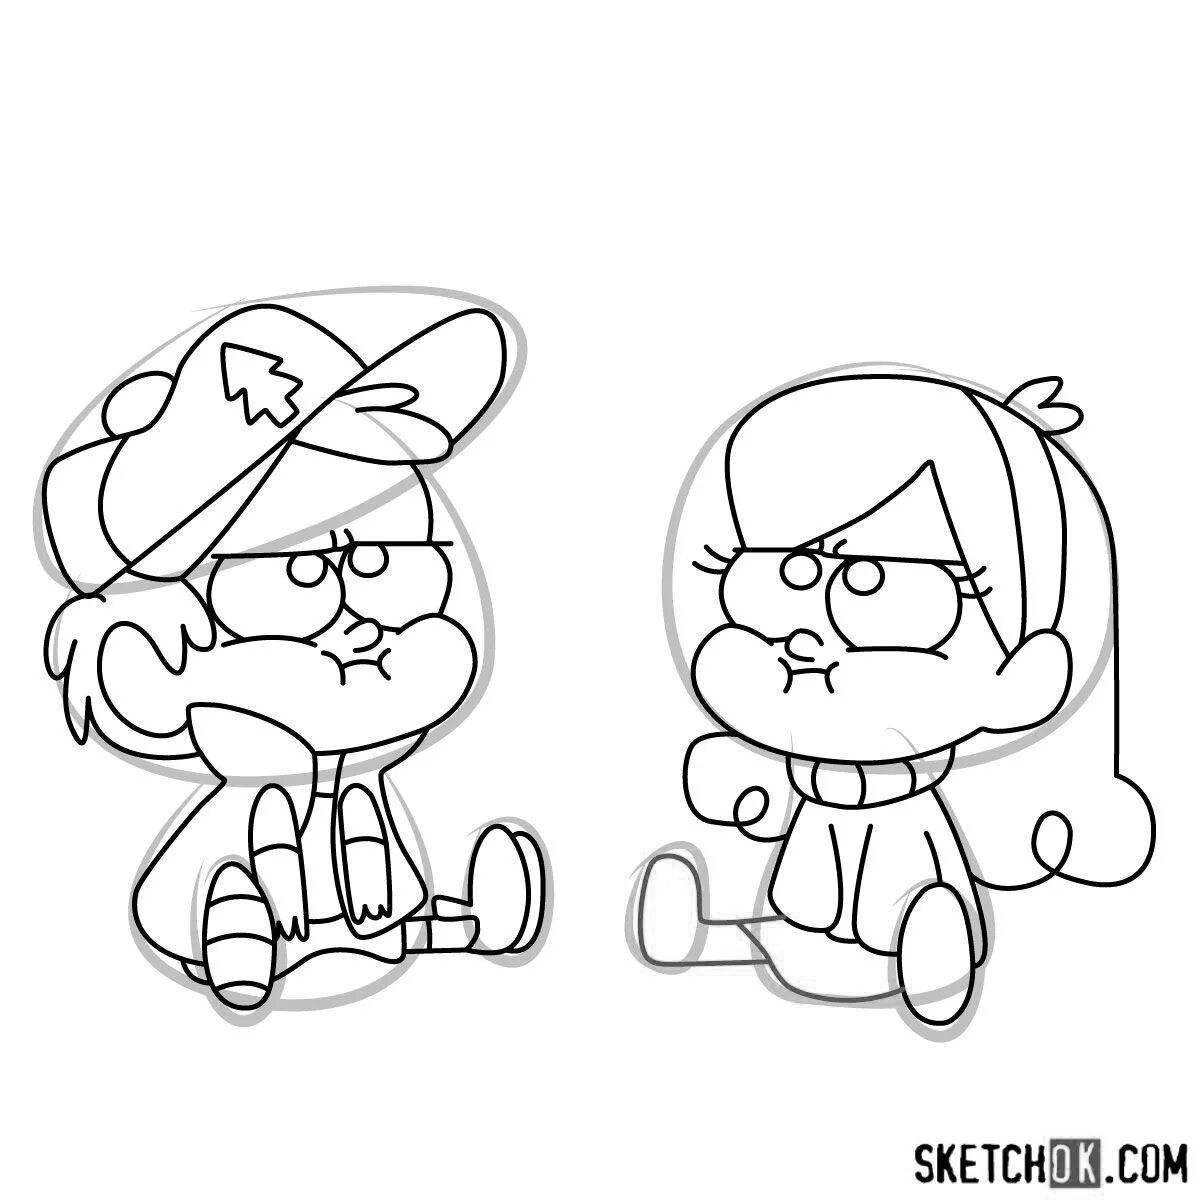 Dazzling mabel and chubby coloring book